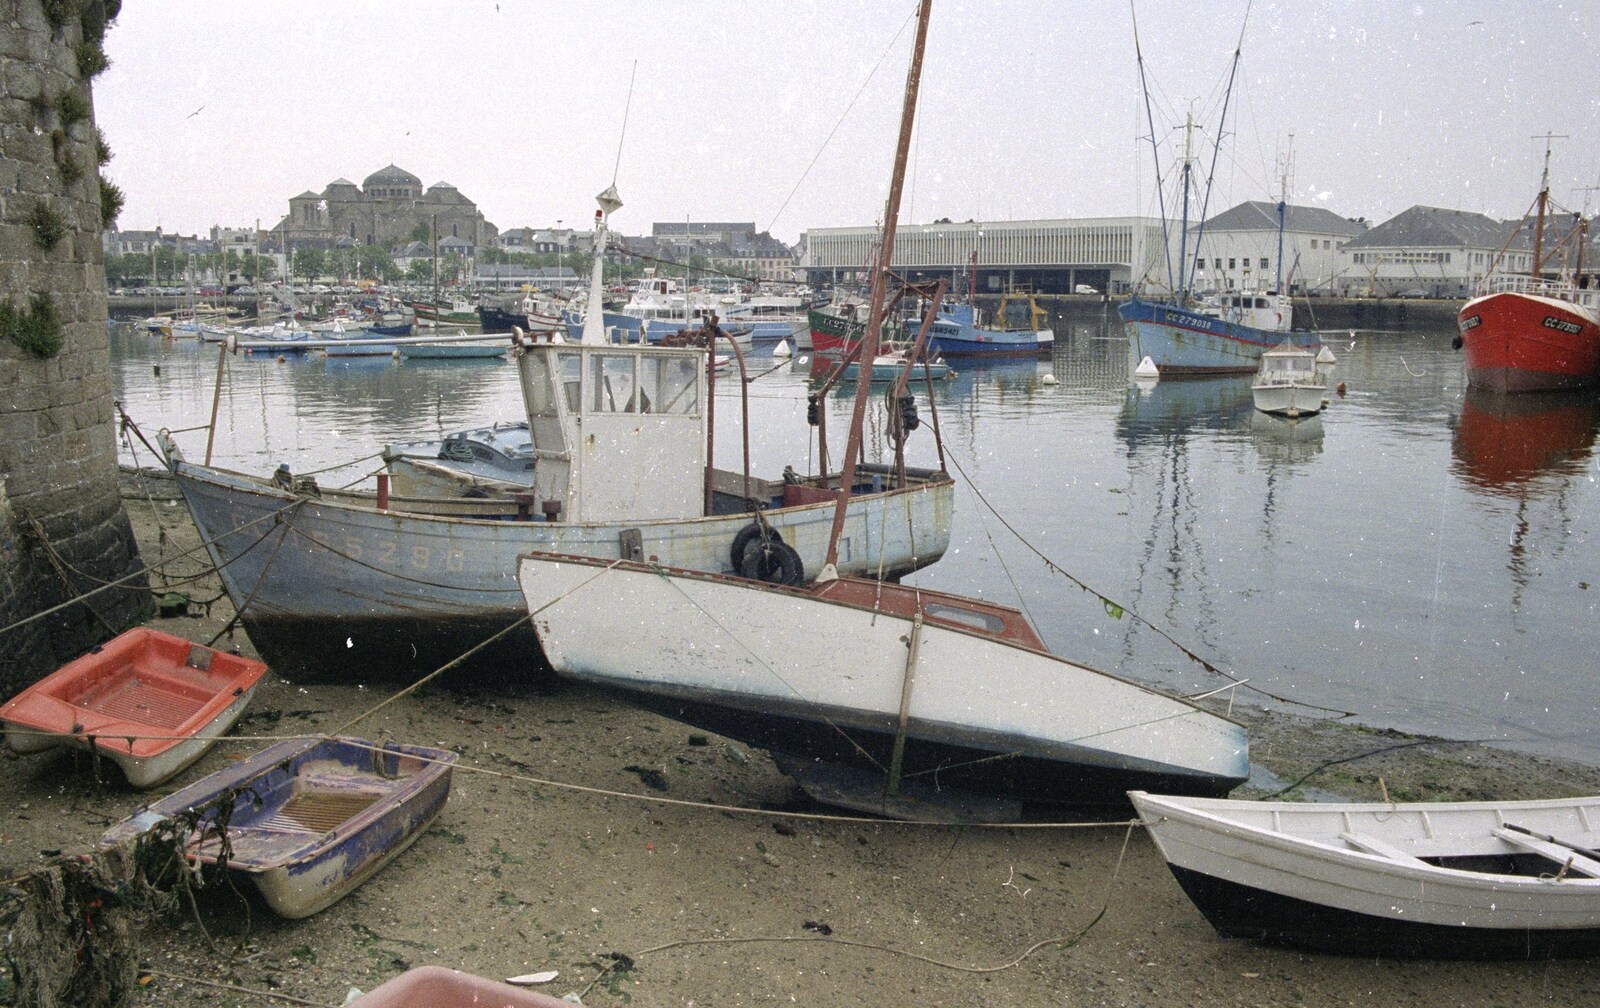 A Trip To Huelgoat, Brittany, France - 11th June 1990: Stranded boats